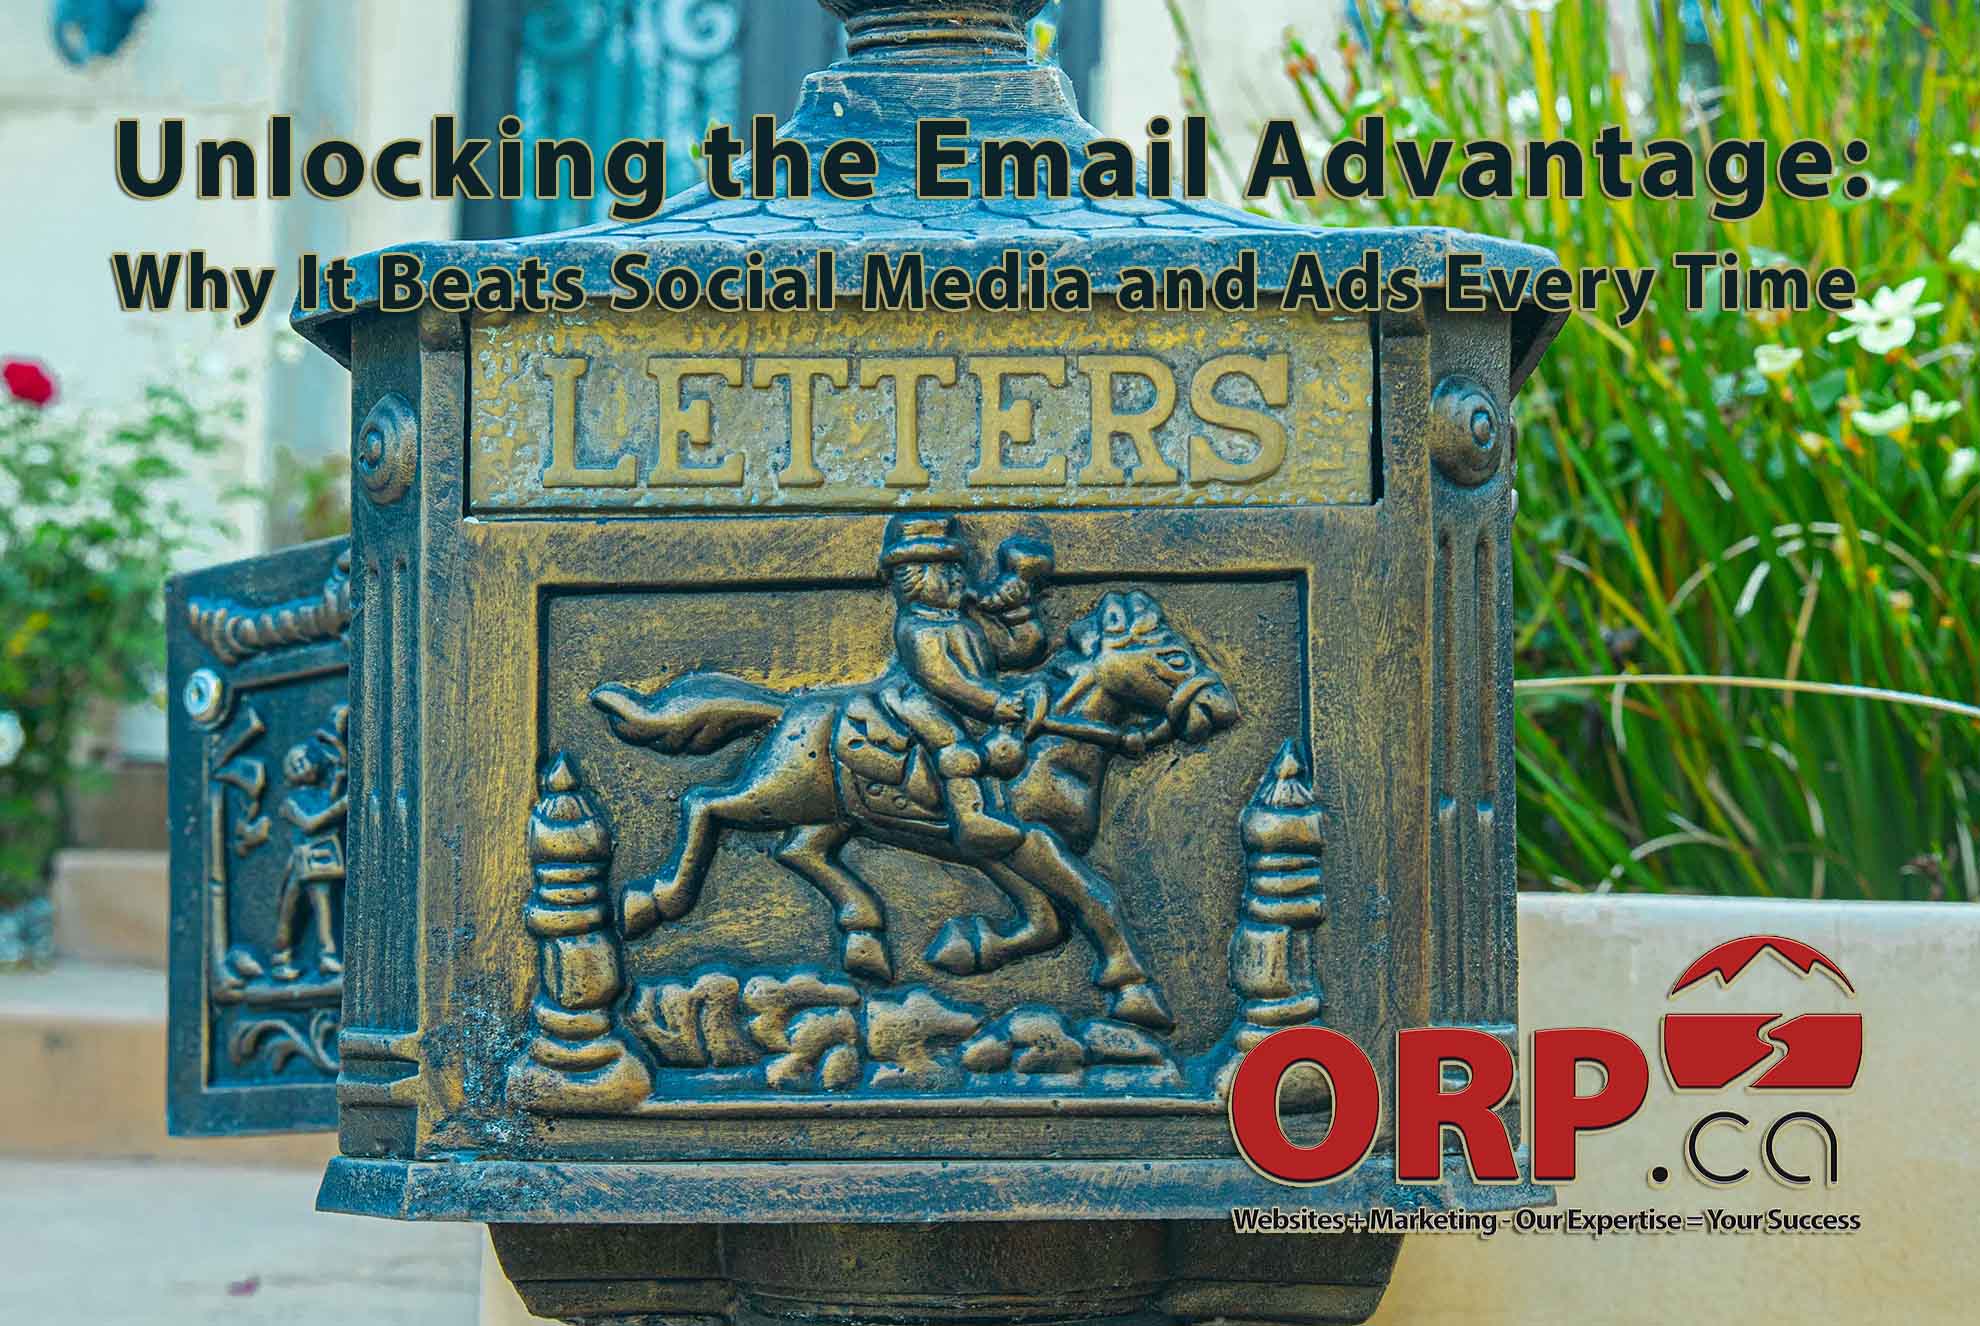 Unlocking the Email Advantage Why It Beats Social Media and Ads Every Time - a Digital Marketing article from ORP.ca Websites + Marketing: Our Expertise  = Your Success - Services for Small Business and Business Professionals&quot;